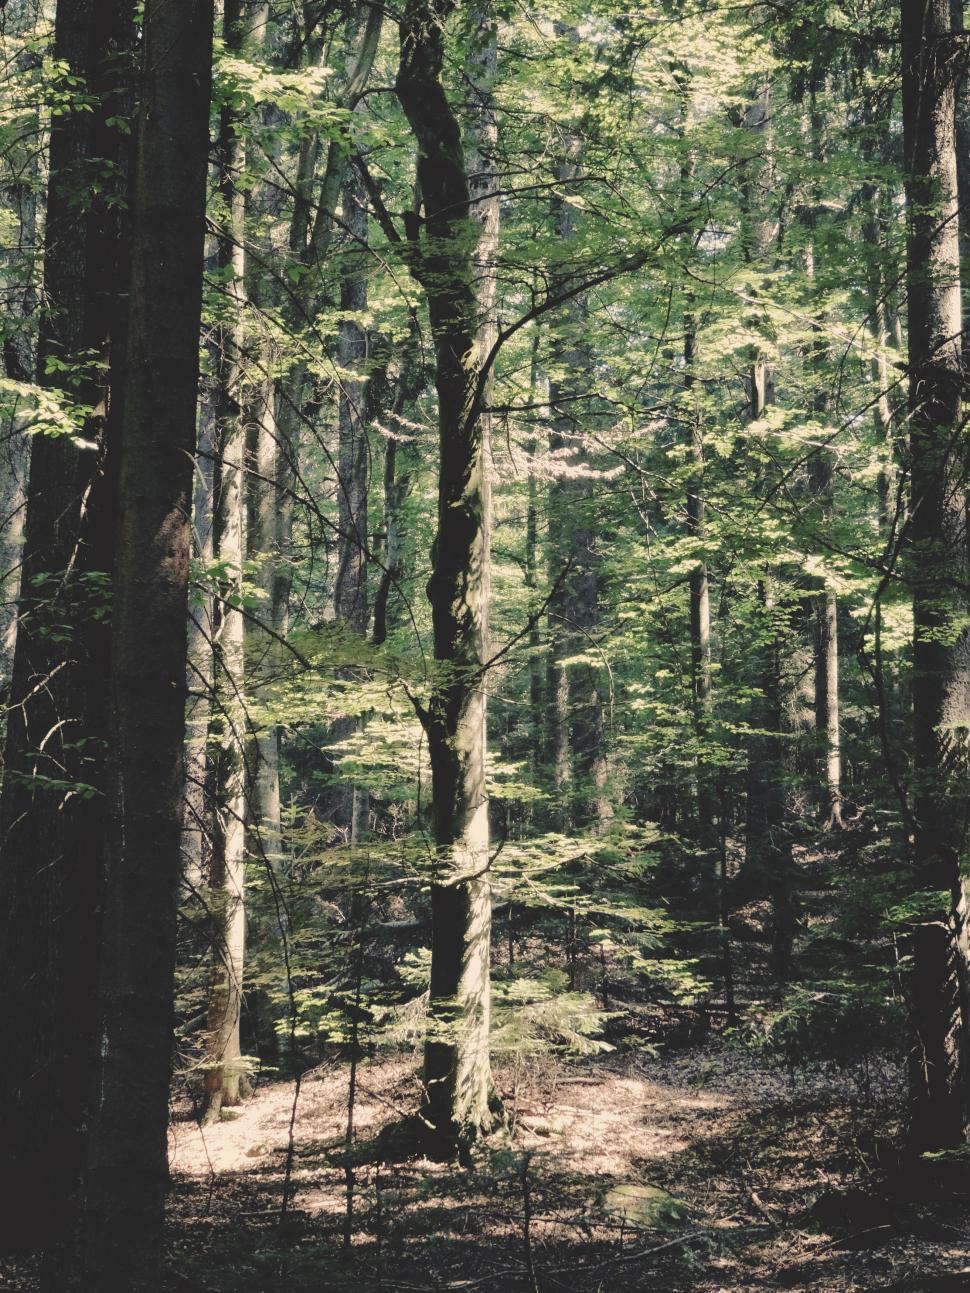 Free Image of Towering Forest Stretching Into the Sky 